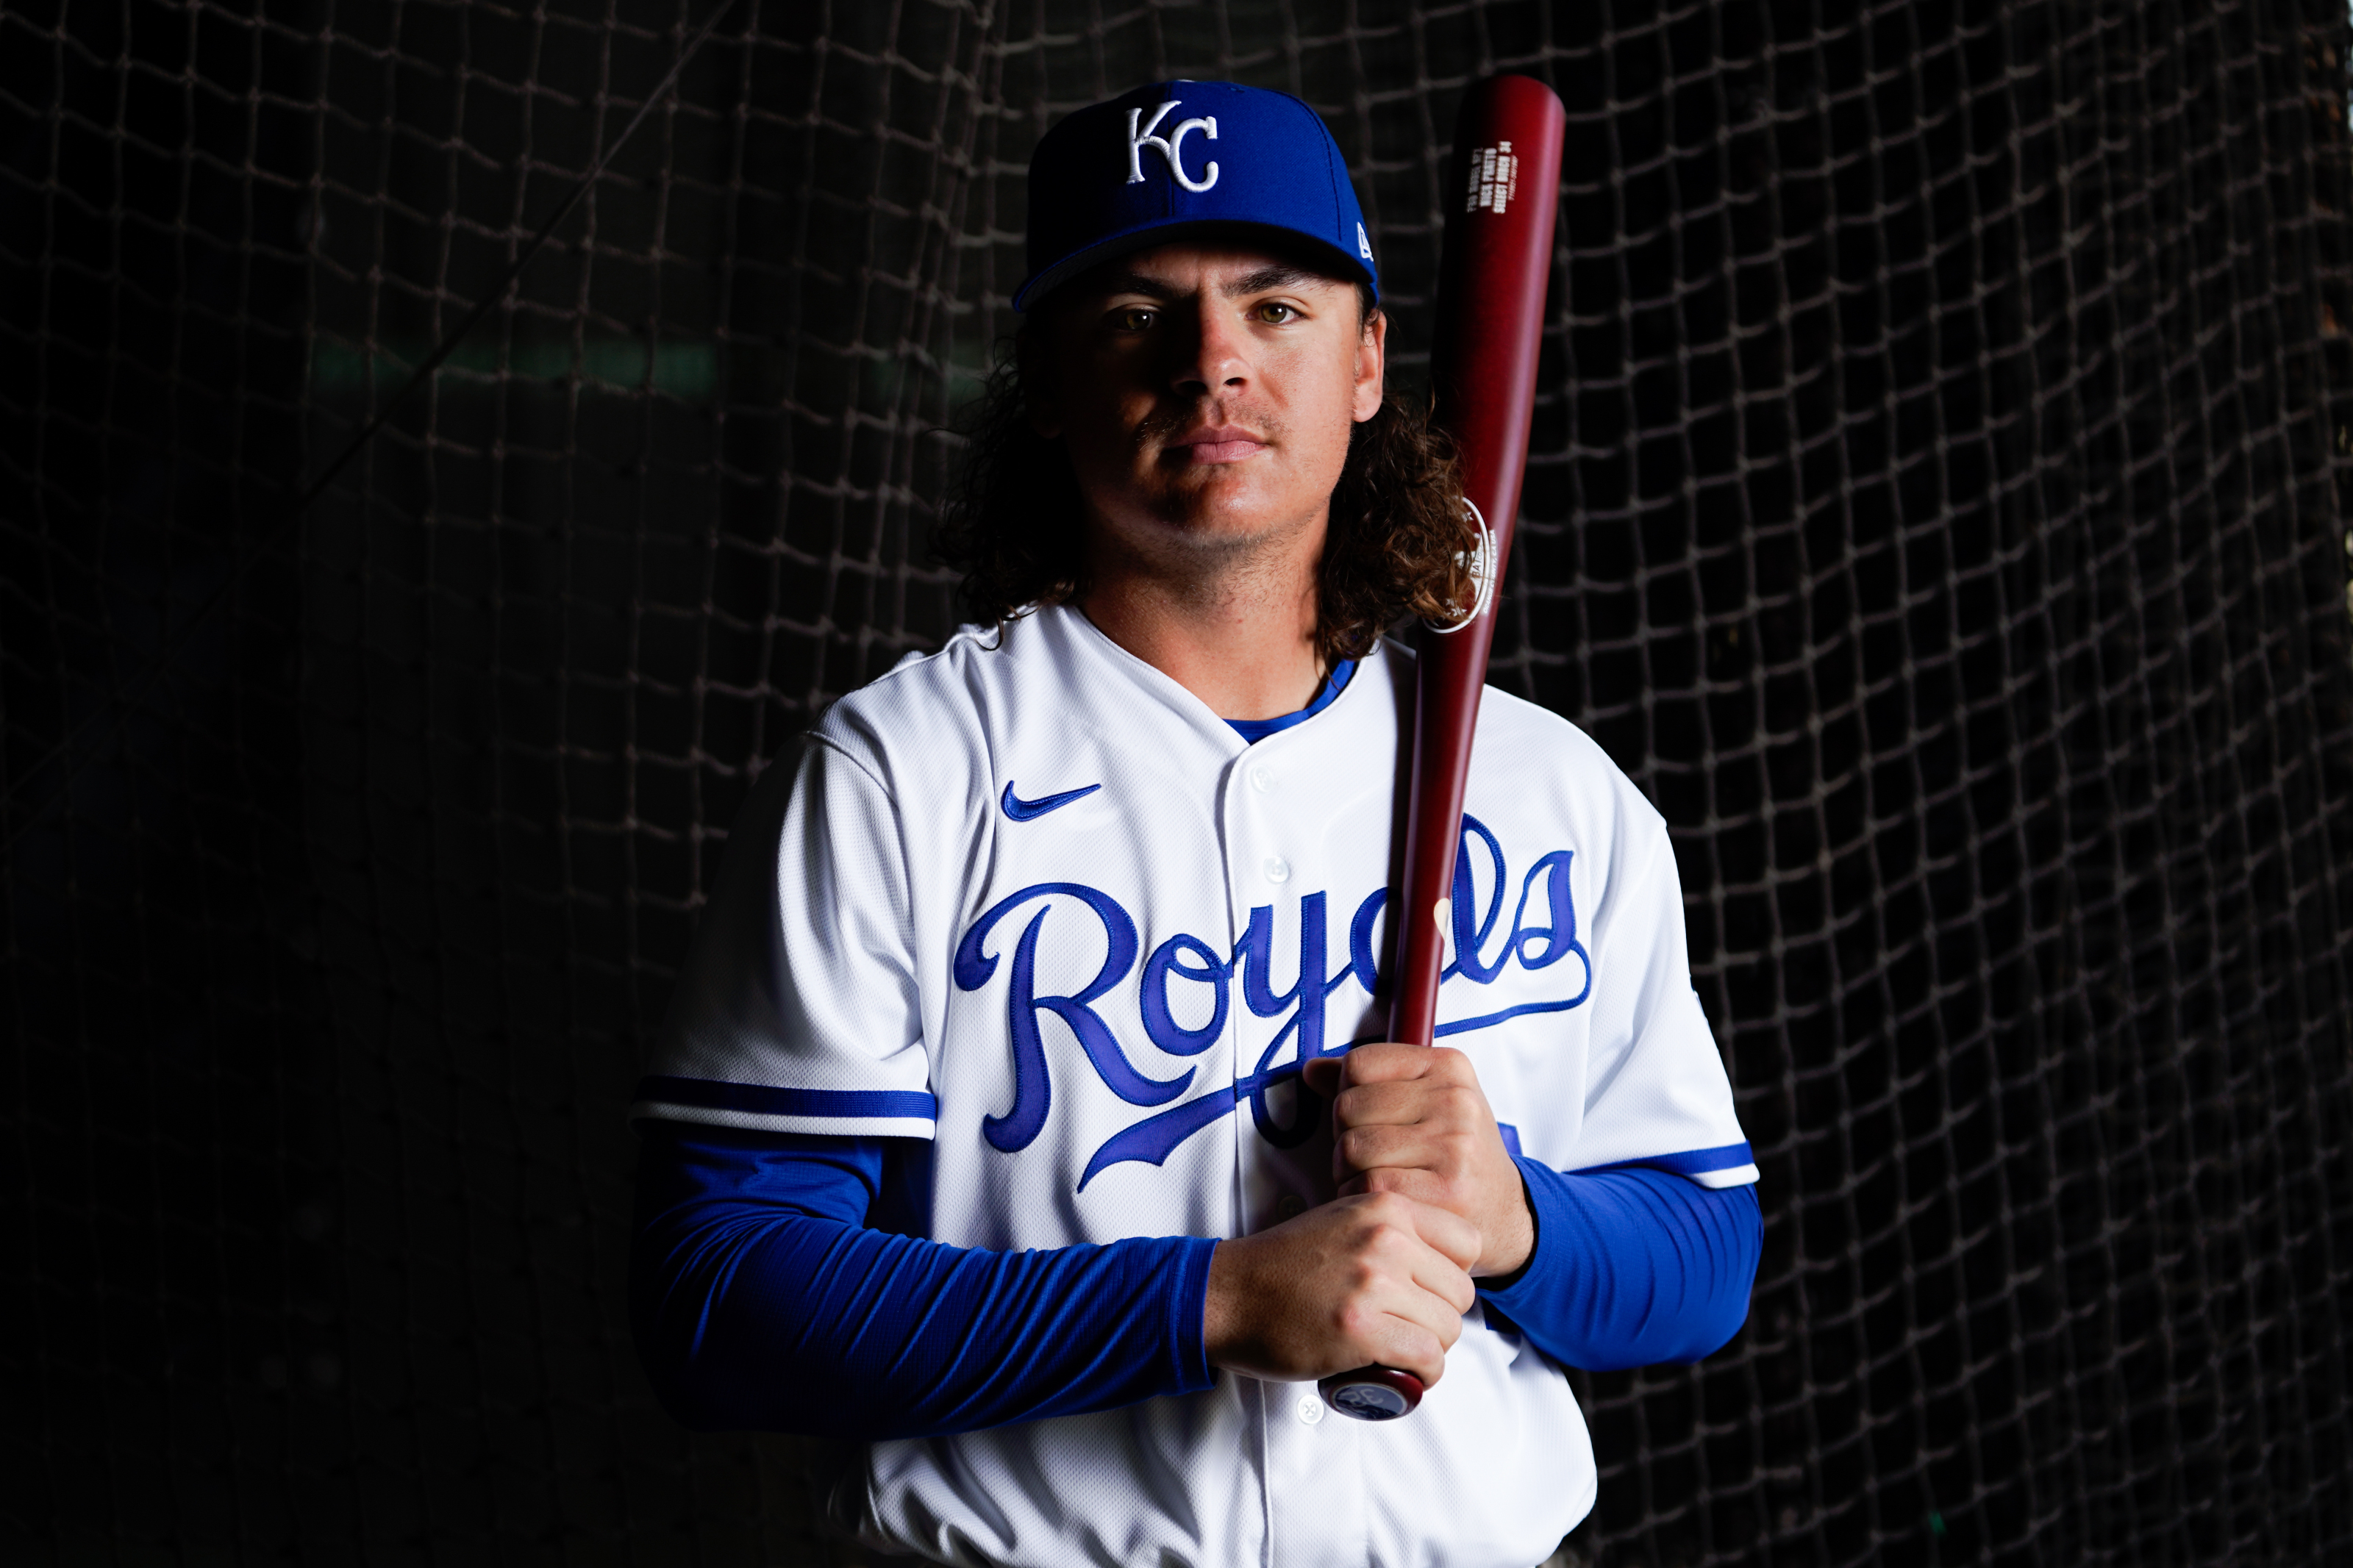 Kyle Isbel of the Kansas City Royals poses for a photo during the News  Photo - Getty Images